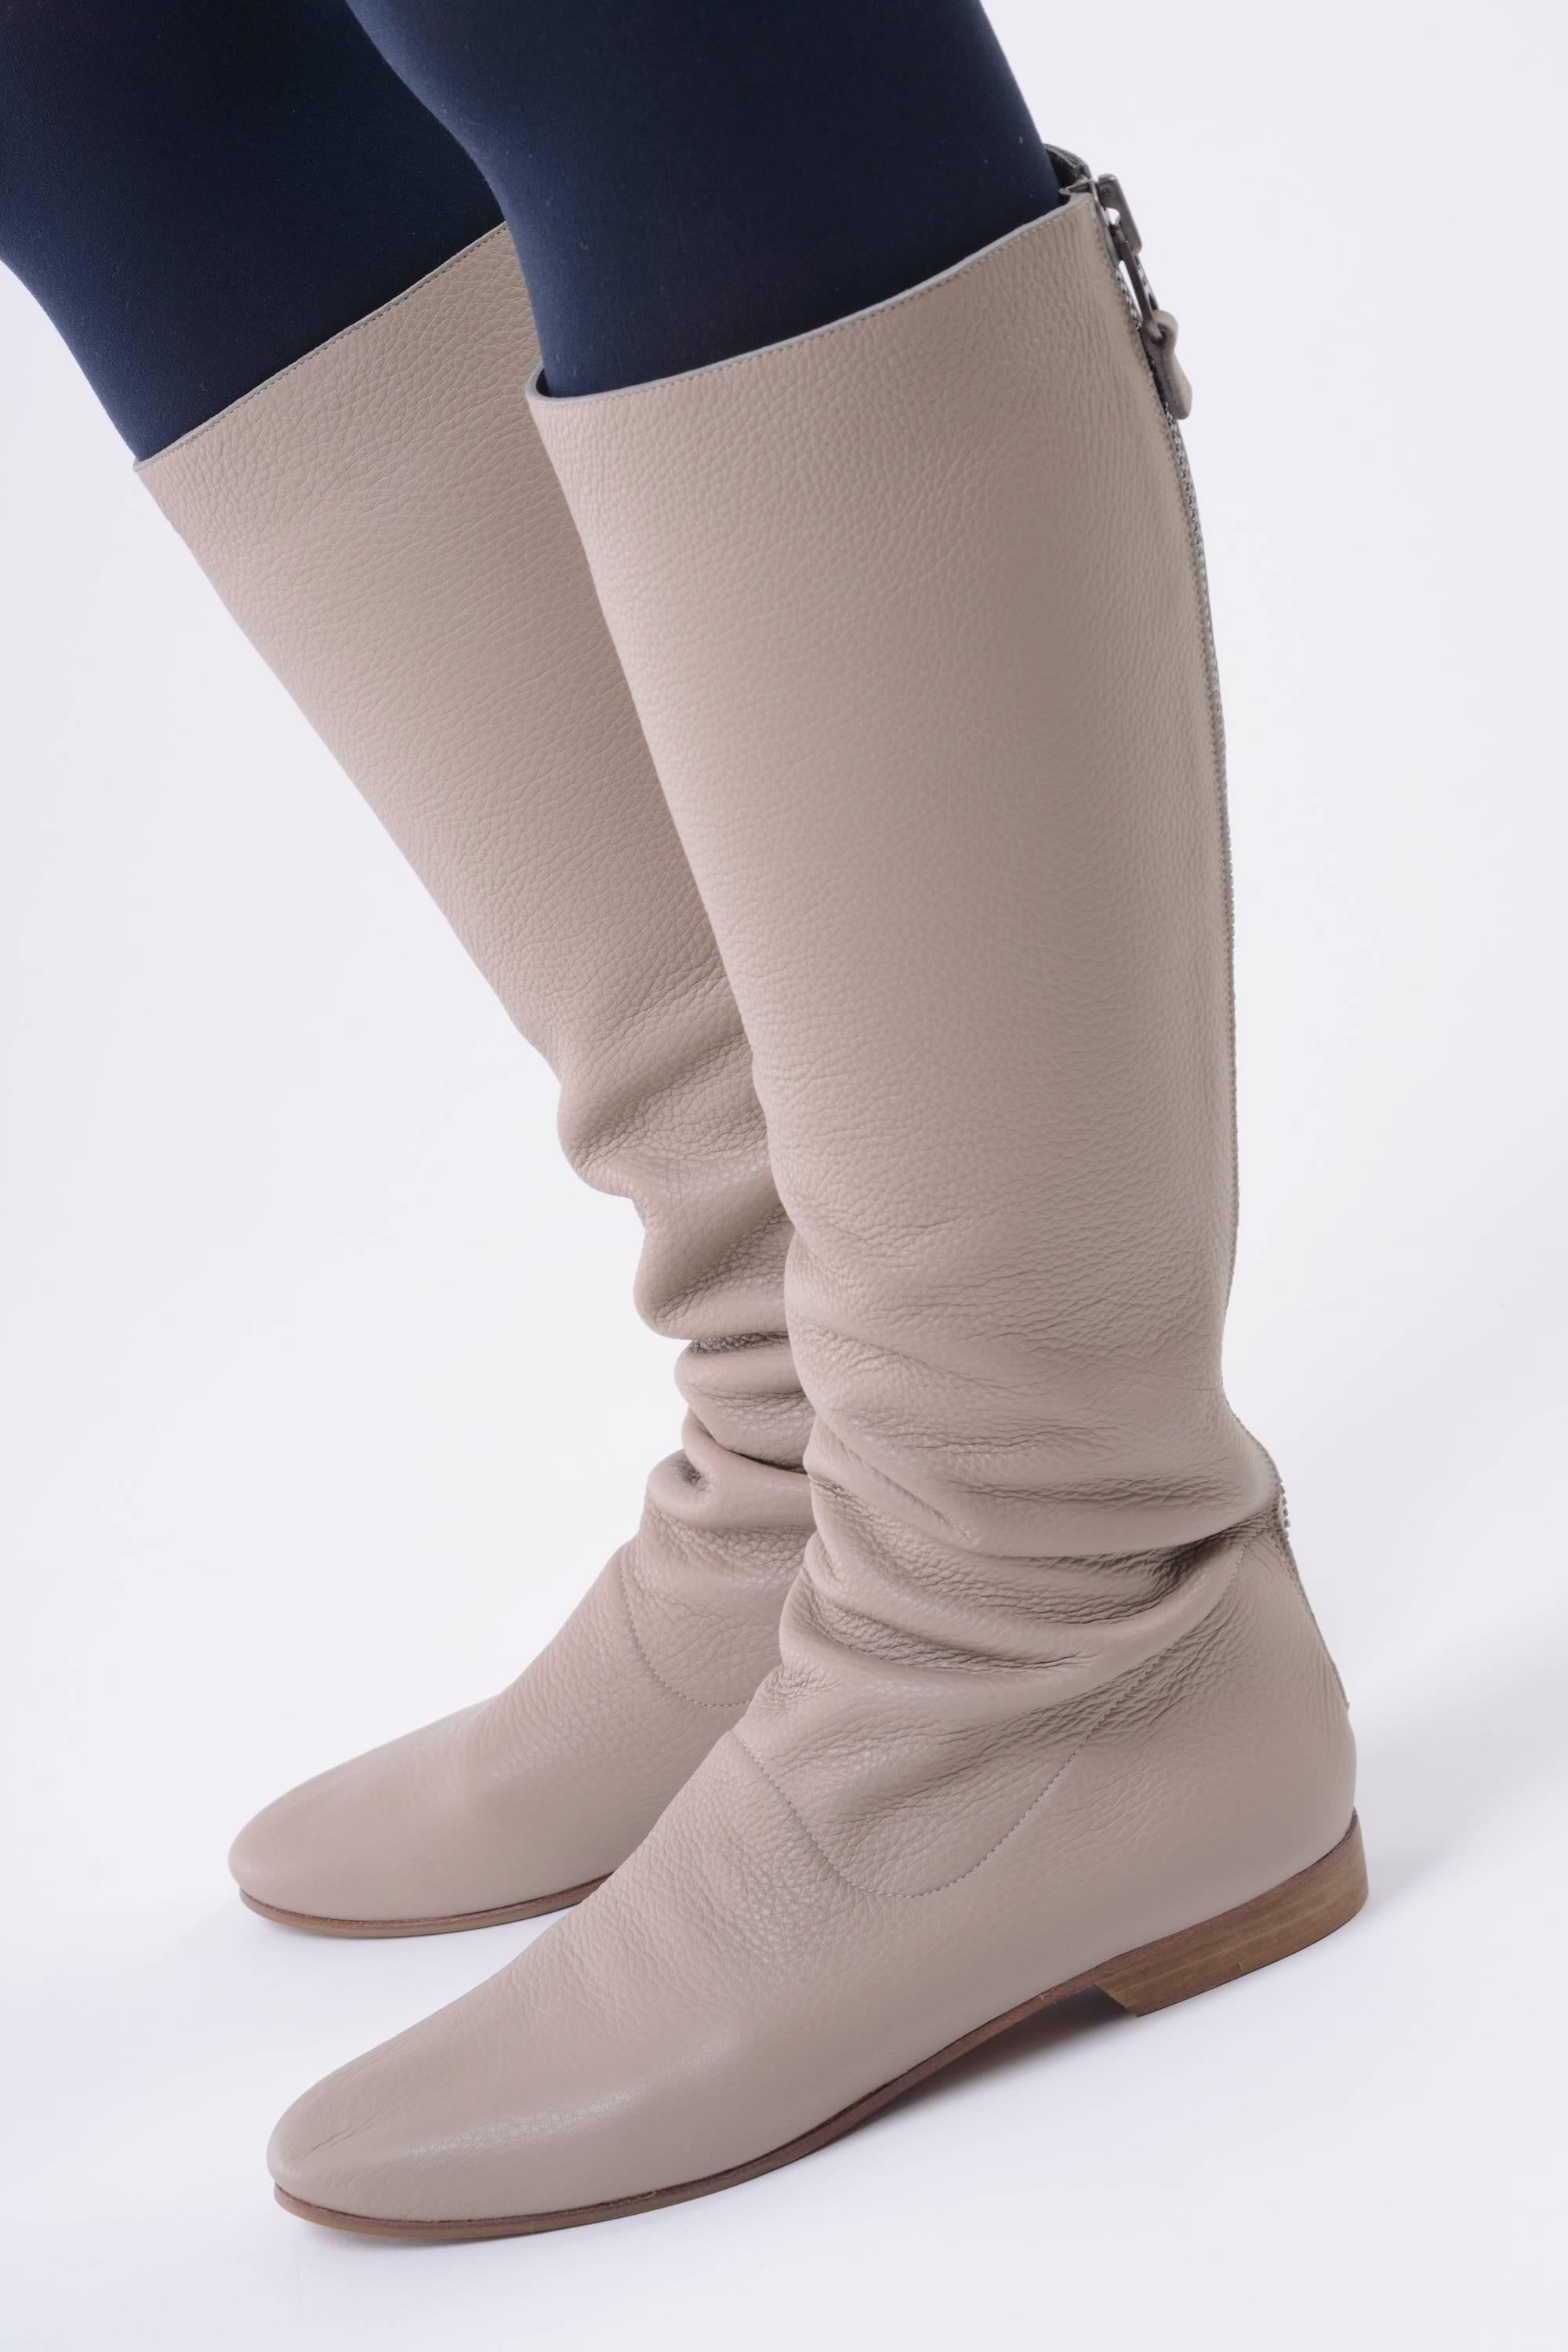 Henry Beguelin Beige Deer Leather Knee Slouch Boots  For Sale 3